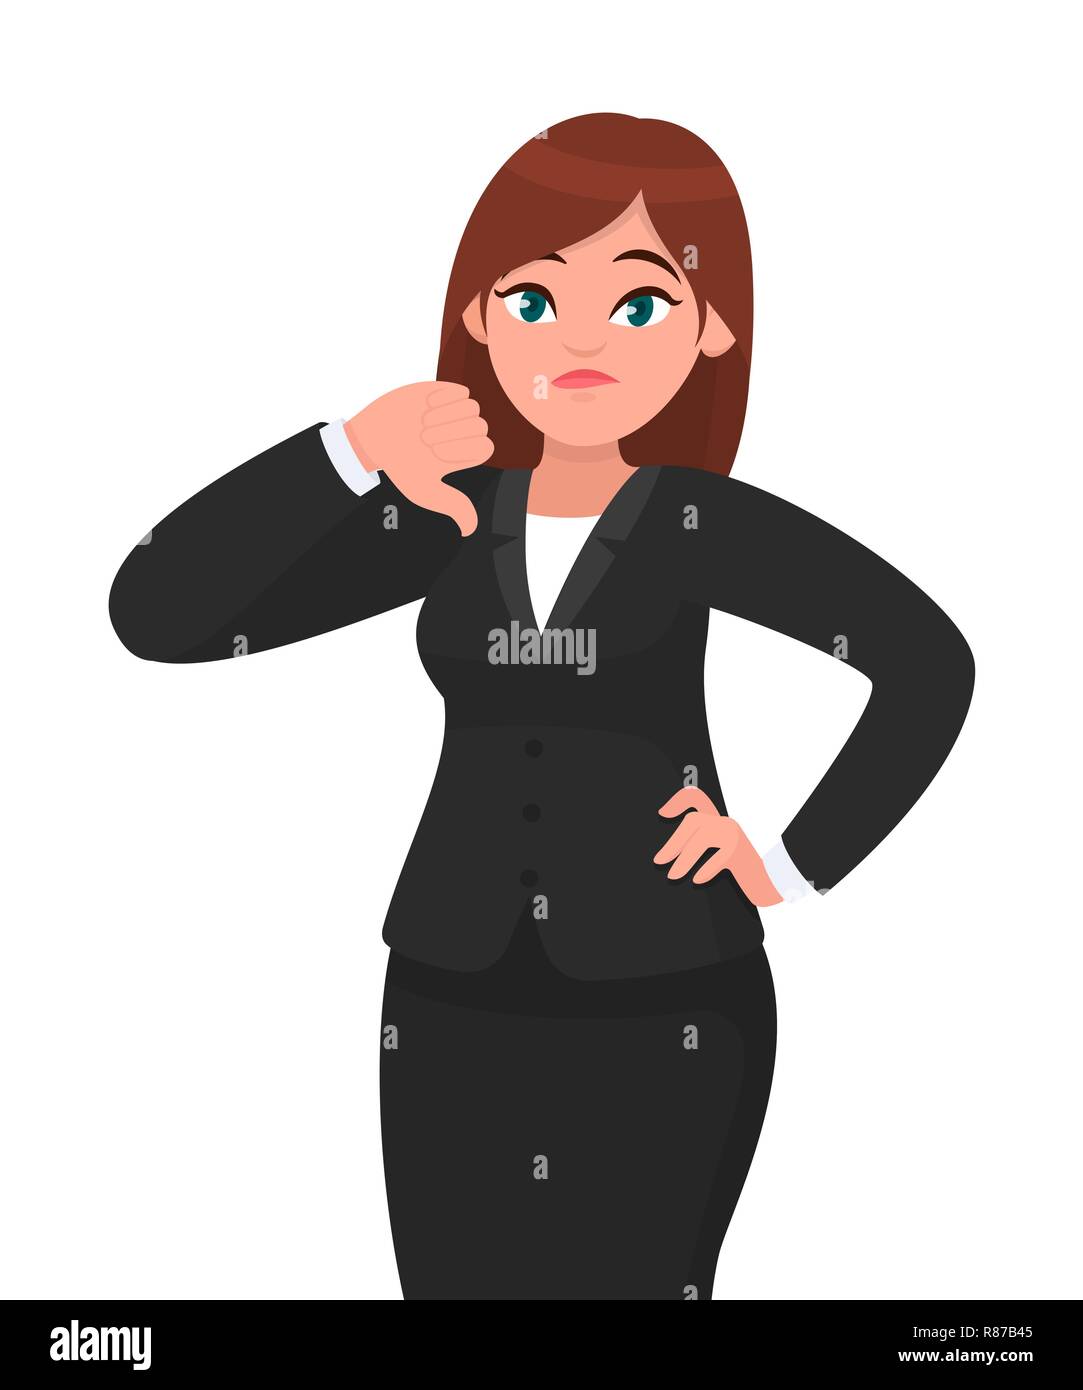 Businesswoman showing thumbs down gesture/sign. Dislike, disapprove, rejection, disagree concept illustration in vector cartoon style. Business woman Stock Vector